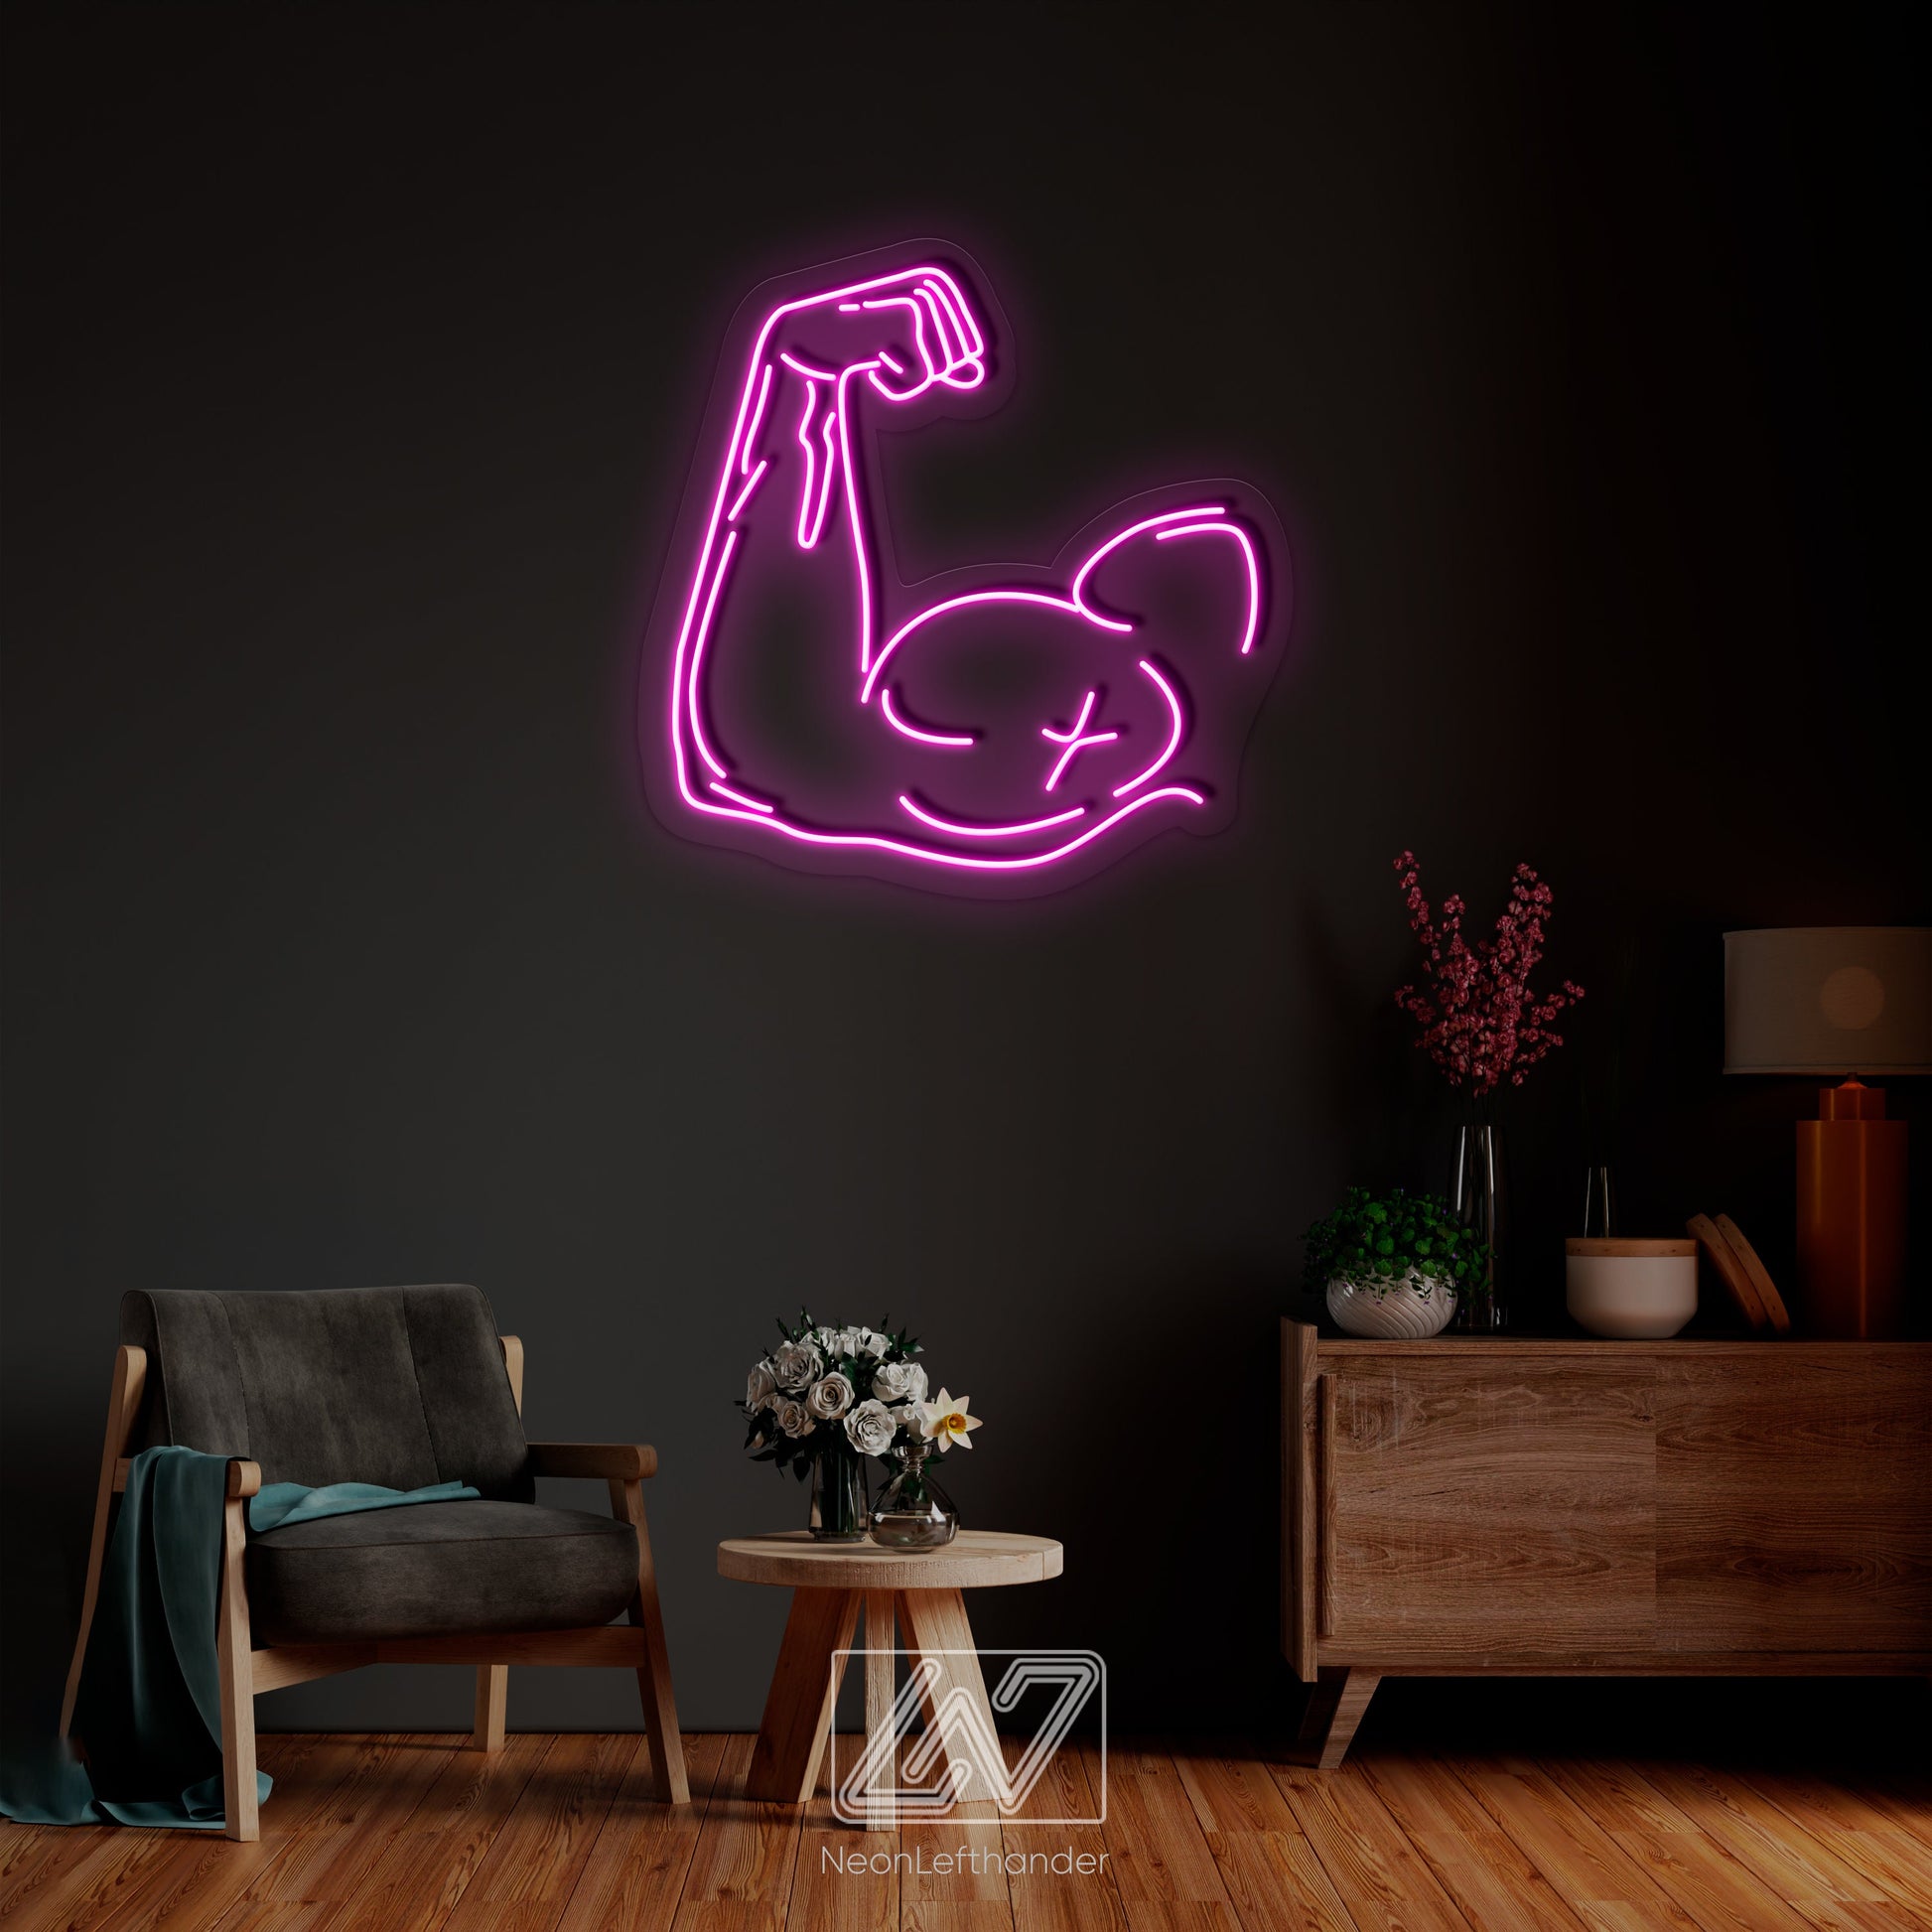 Muscle - LED Neon Sign, Vibe Neon Sign, No Pain No Gain Sign, Neon Sign for Gym, Motivation Neon Sign, Inspiration Quote Led Sign